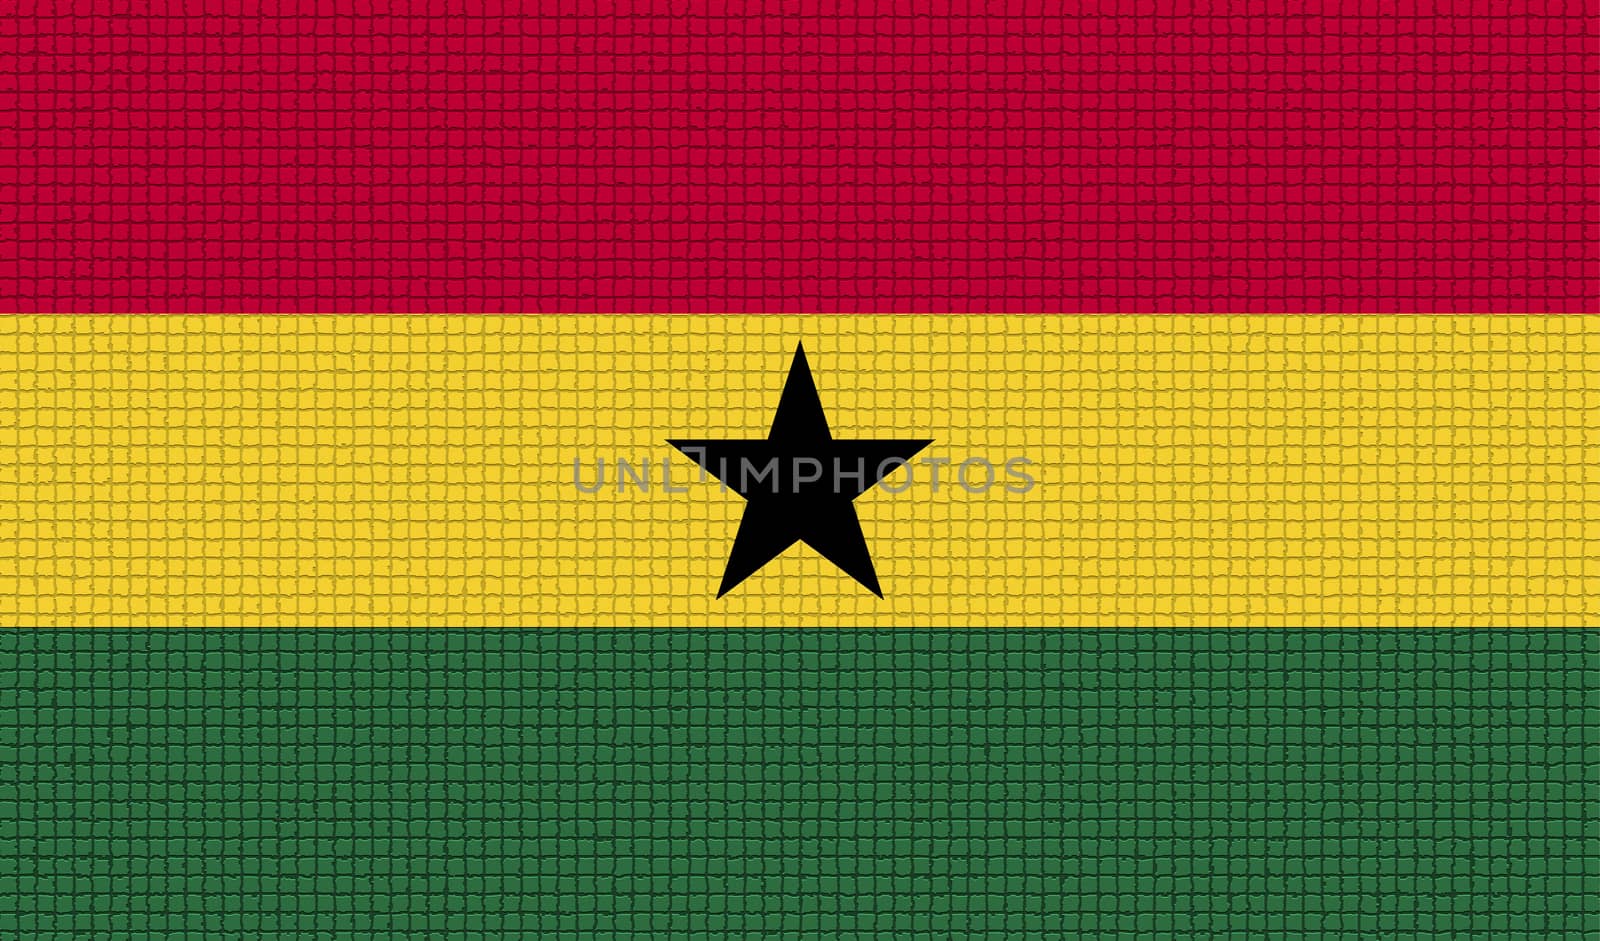 Flags of Ghana with abstract textures. Rasterized version